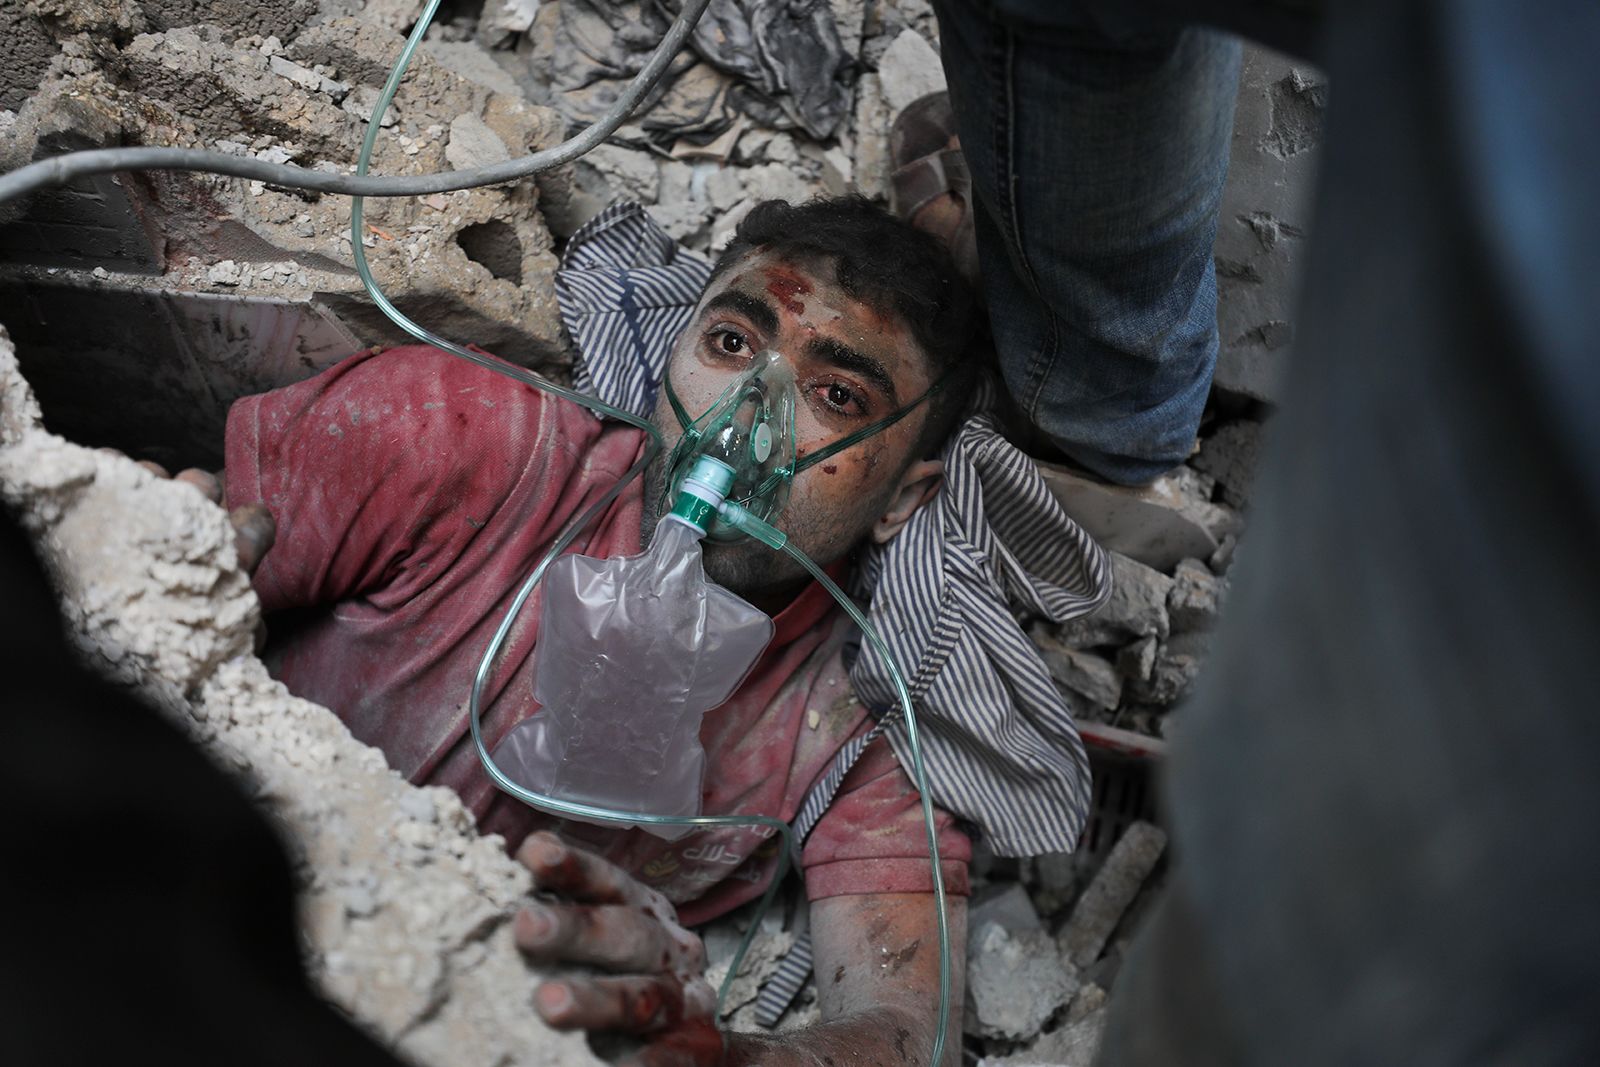 Rescuers assist a survivor of an Israeli bombardment in Nusseirat refugee camp, Gaza, on Tuesday, October 24.